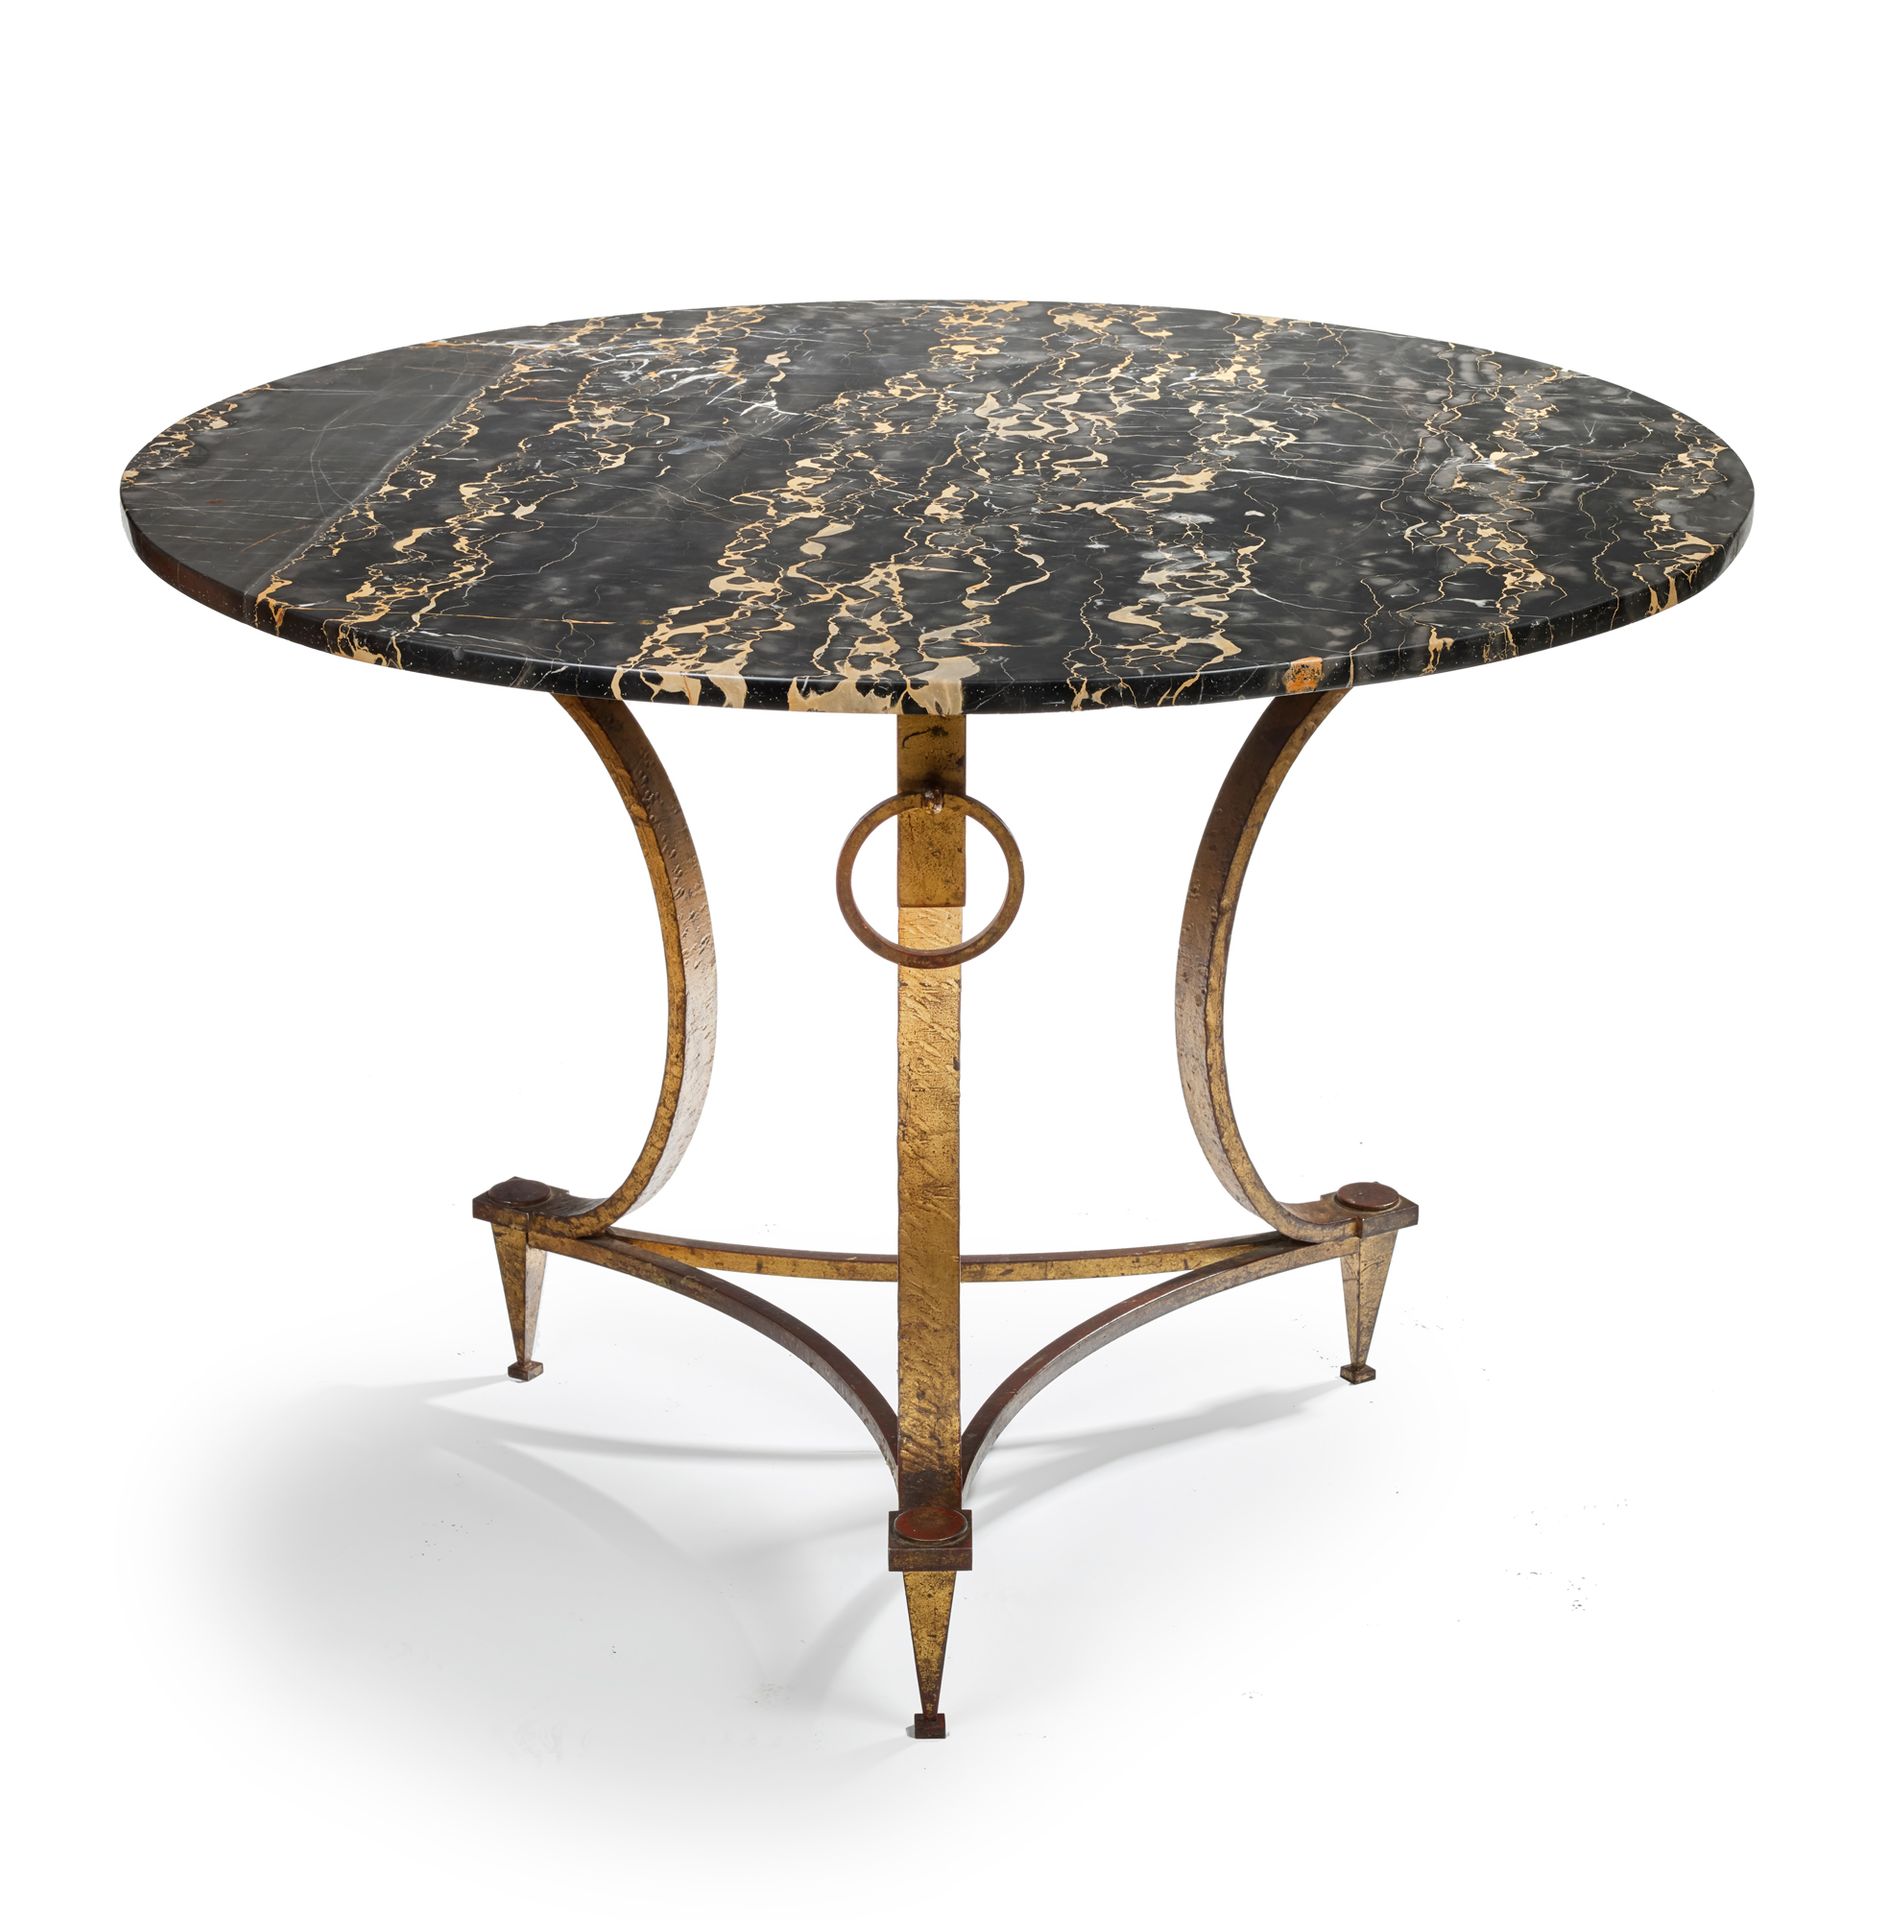 Maison RAMSAY Pedestal table with a circular top resting on a curved tripod base&hellip;